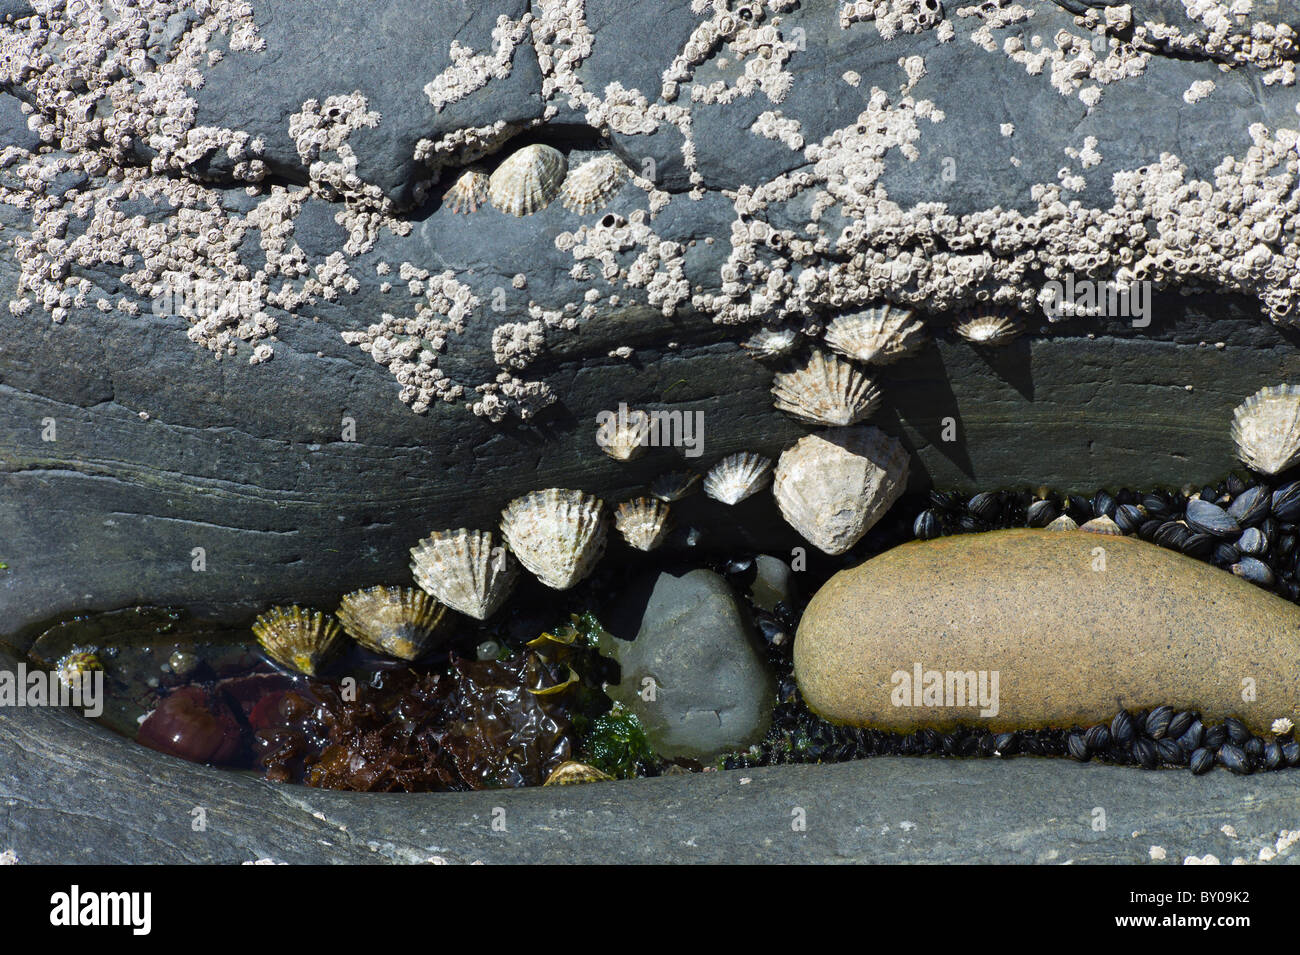 Rockpool with barnacles, mussels, limpets and seaweed at Kilkee, County Clare, West Coast of Ireland Stock Photo